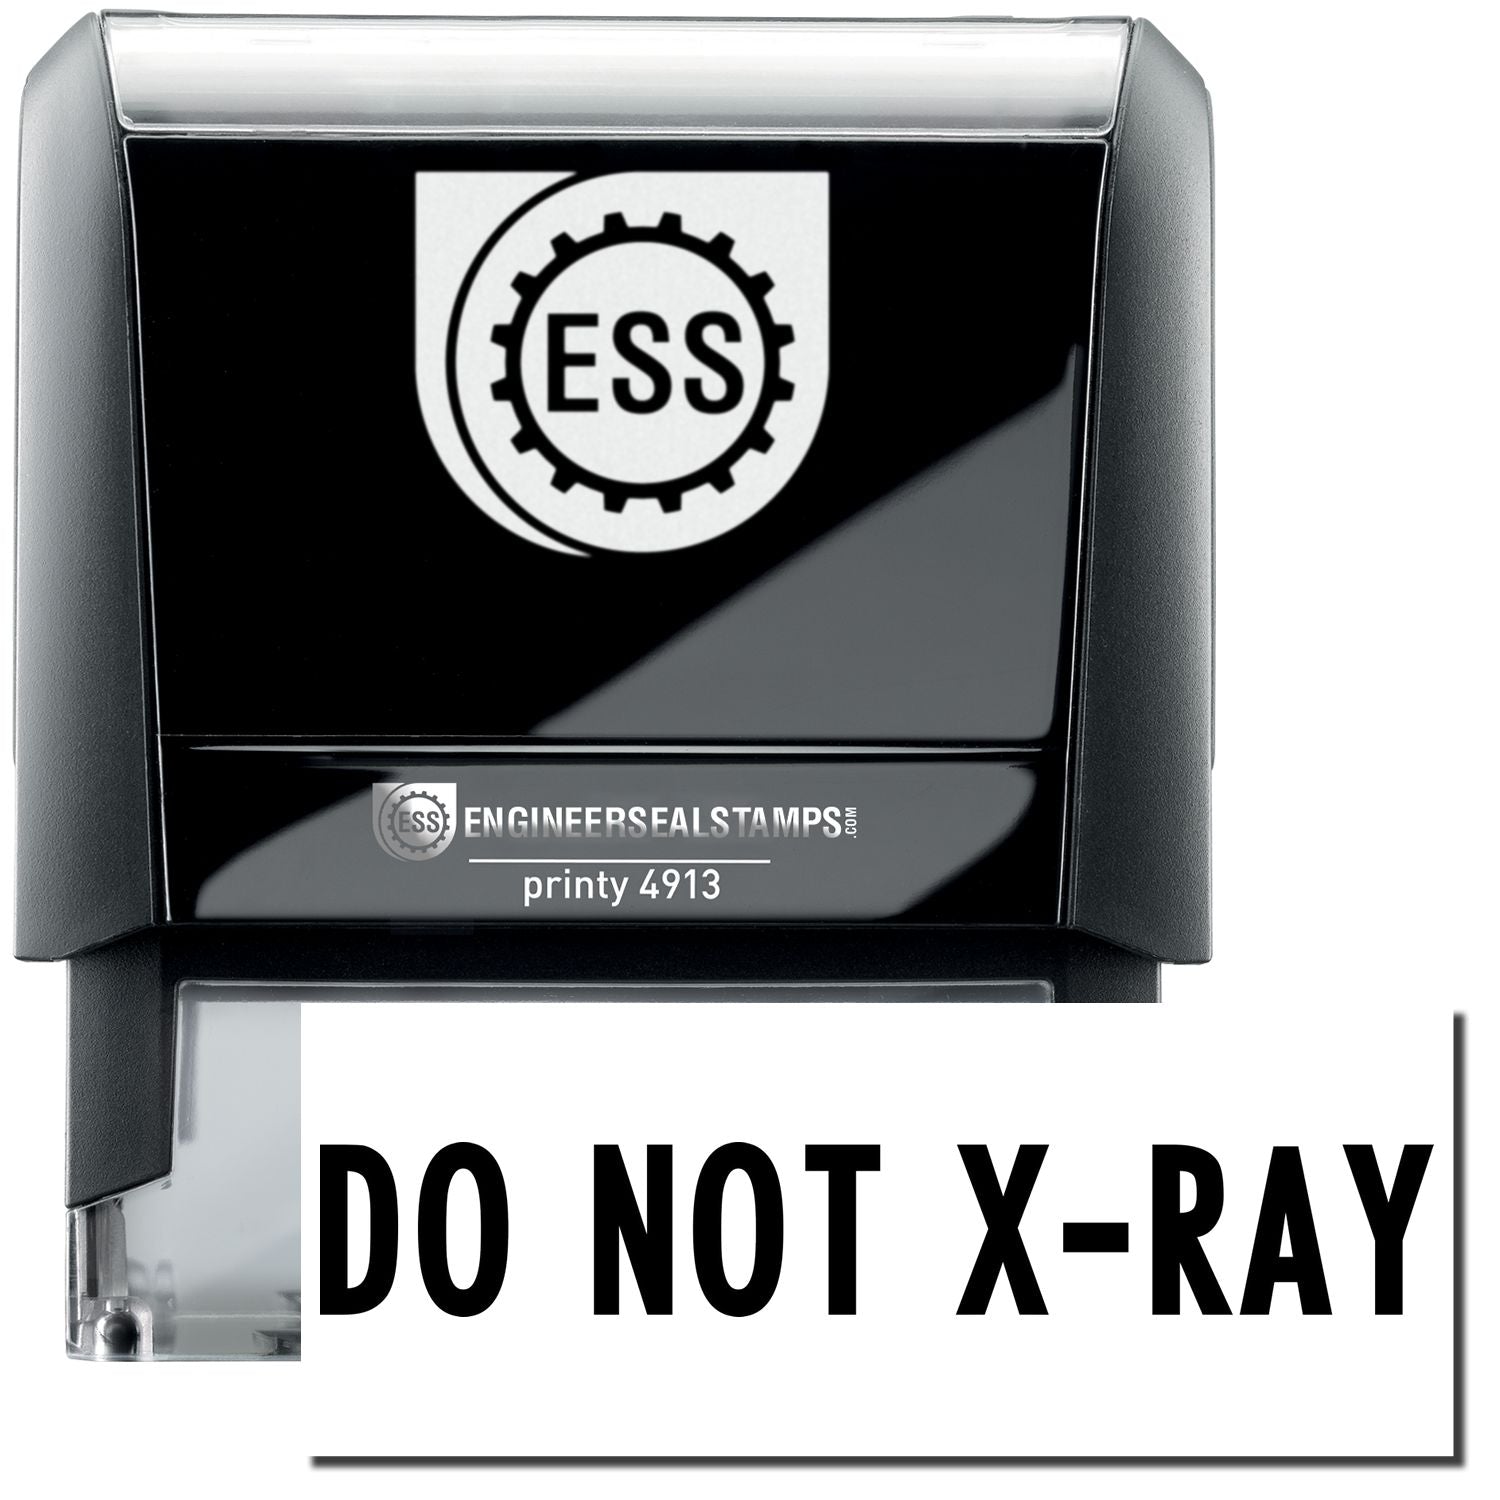 A self-inking stamp with a stamped image showing how the text "DO NOT X-RAY" in a large bold font is displayed by it after stamping.